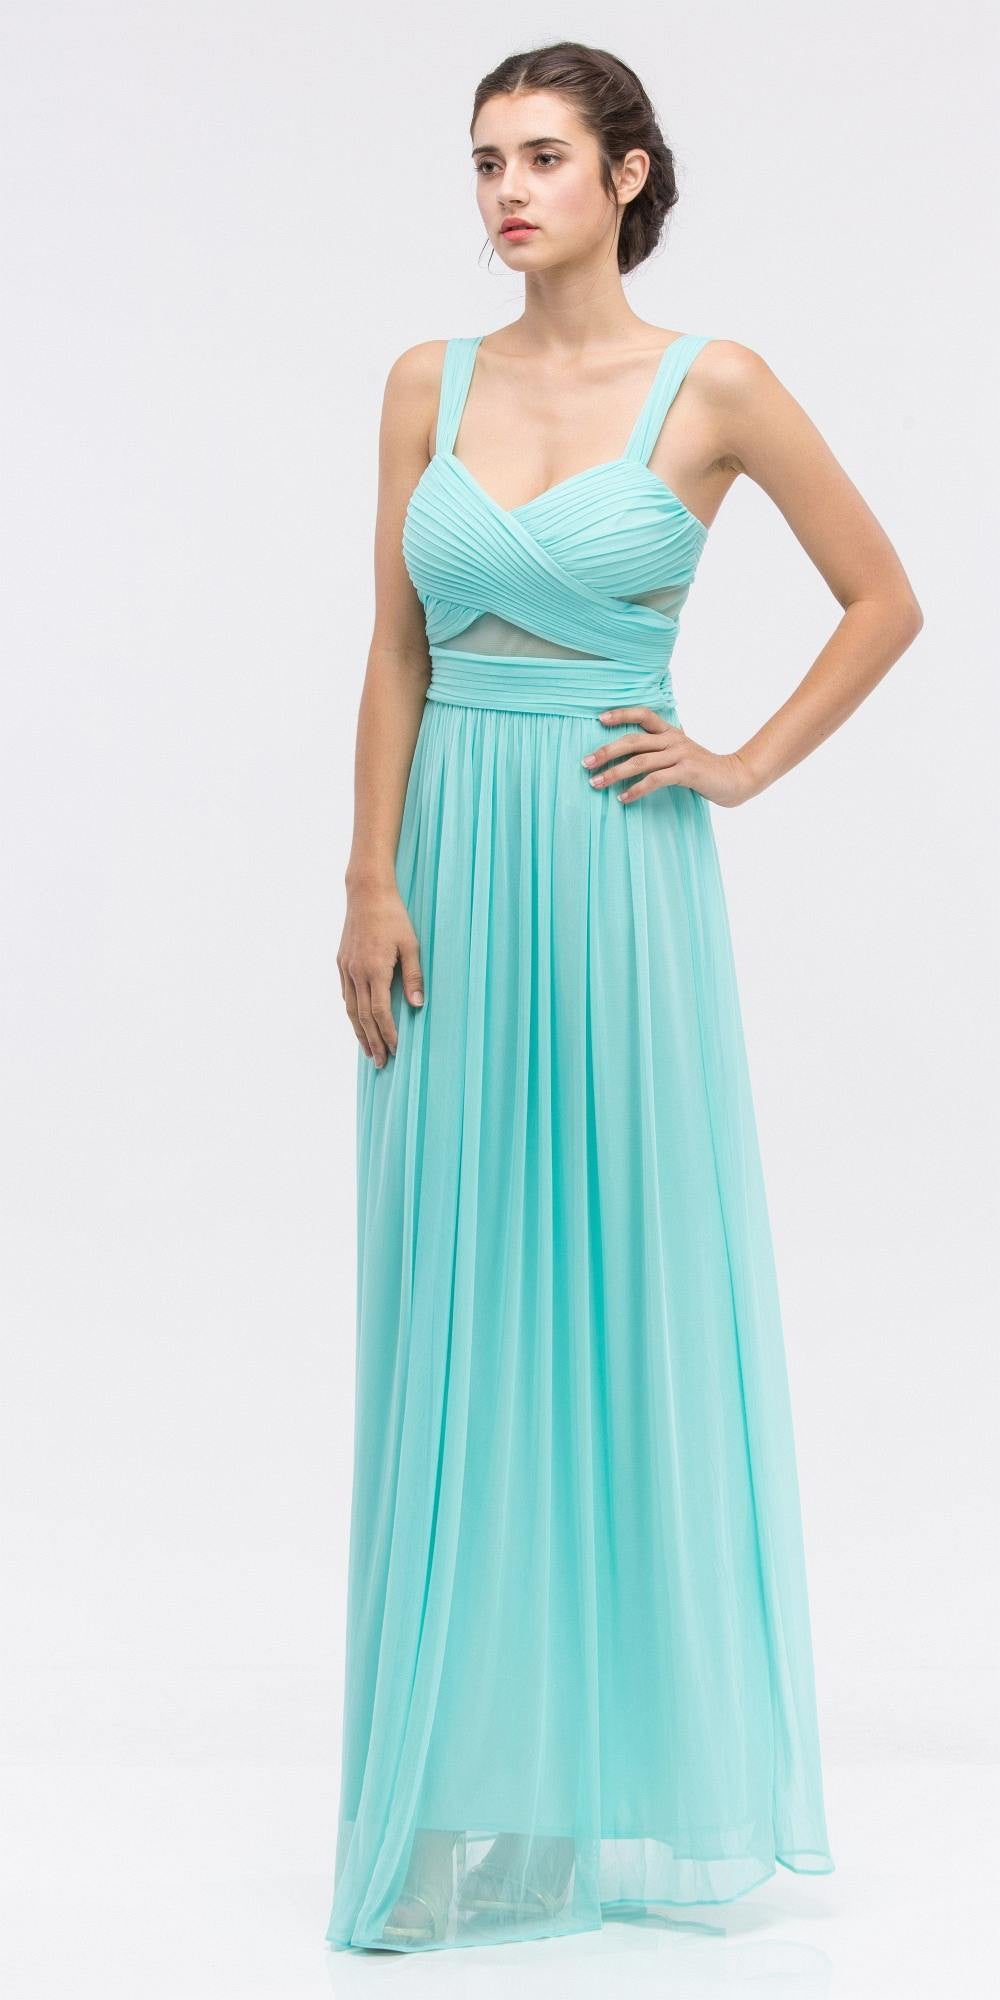 Mint Prom Gown Ruched Bodice Sweetheart Neckline Cut-Out Midriff